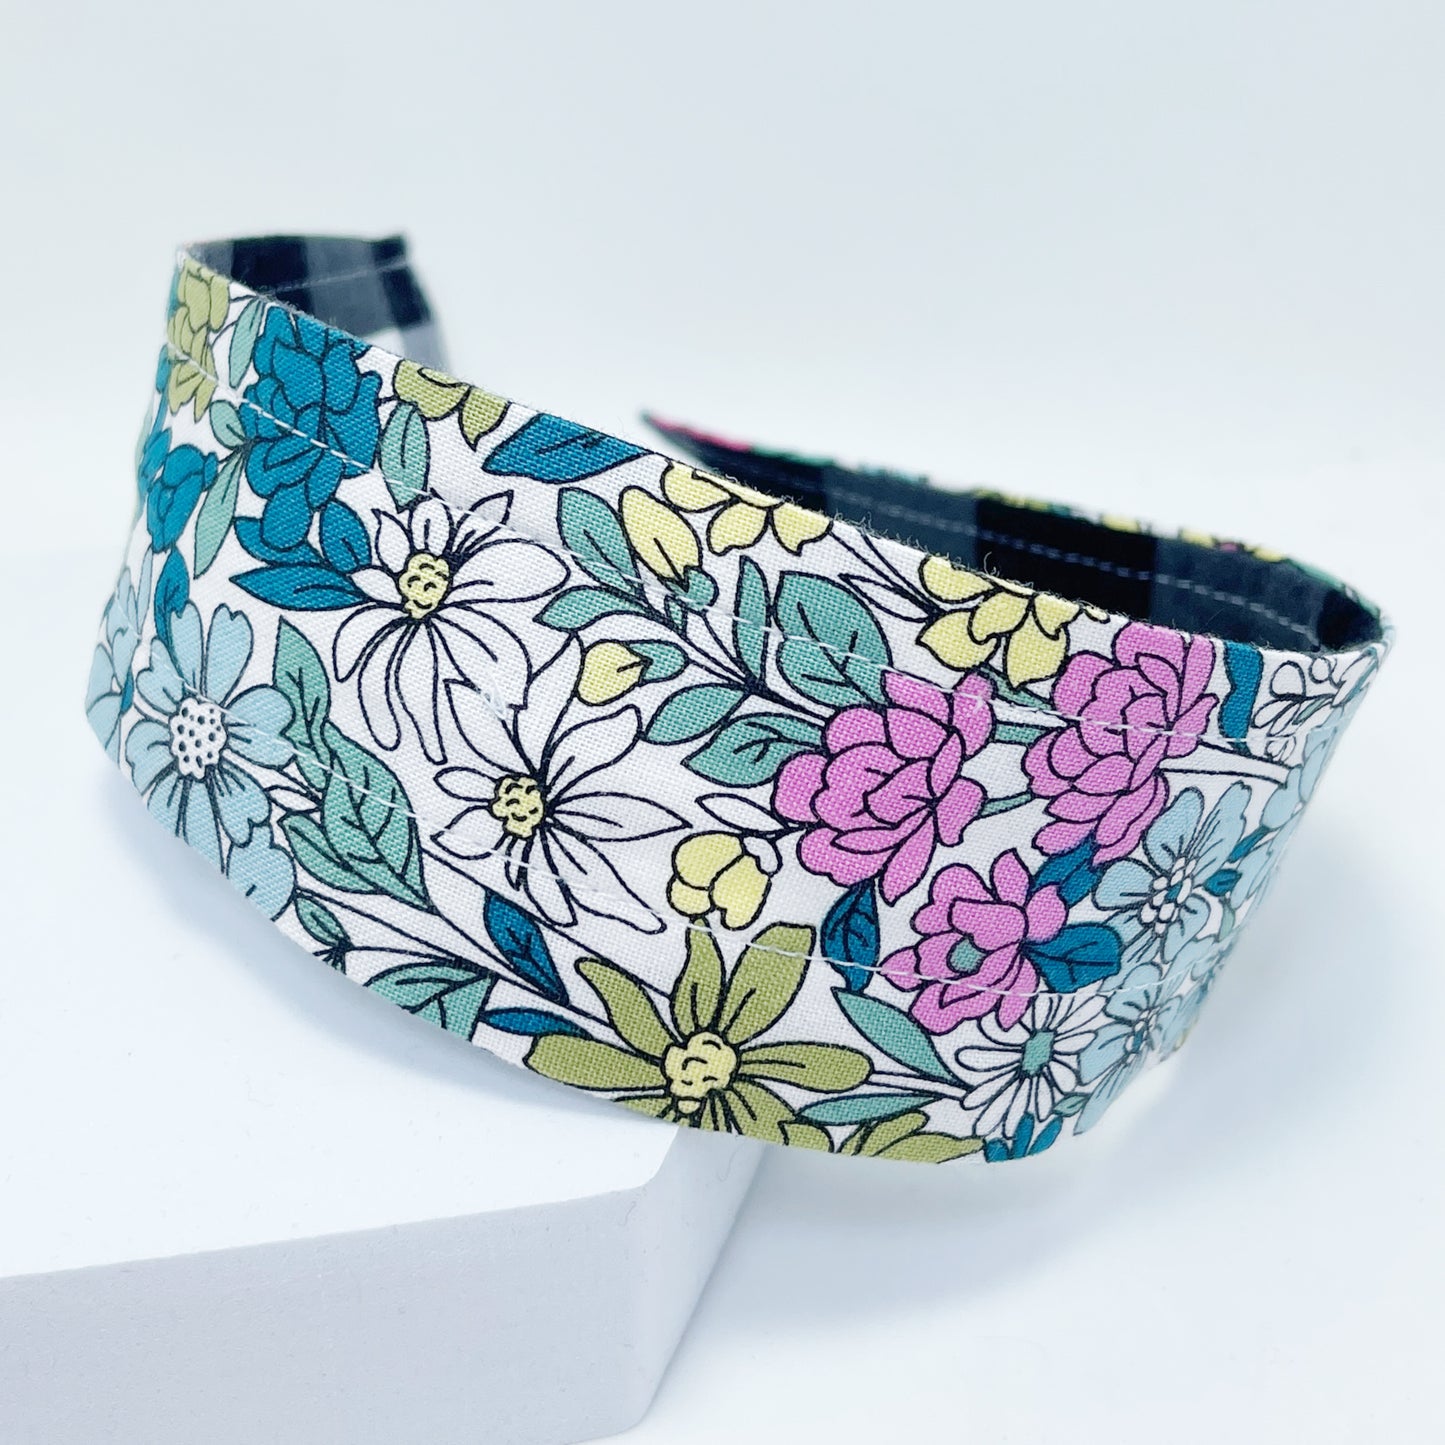 Comfortable Reversible Handmade Fabric Headband - Bright Floral and Black Gingham